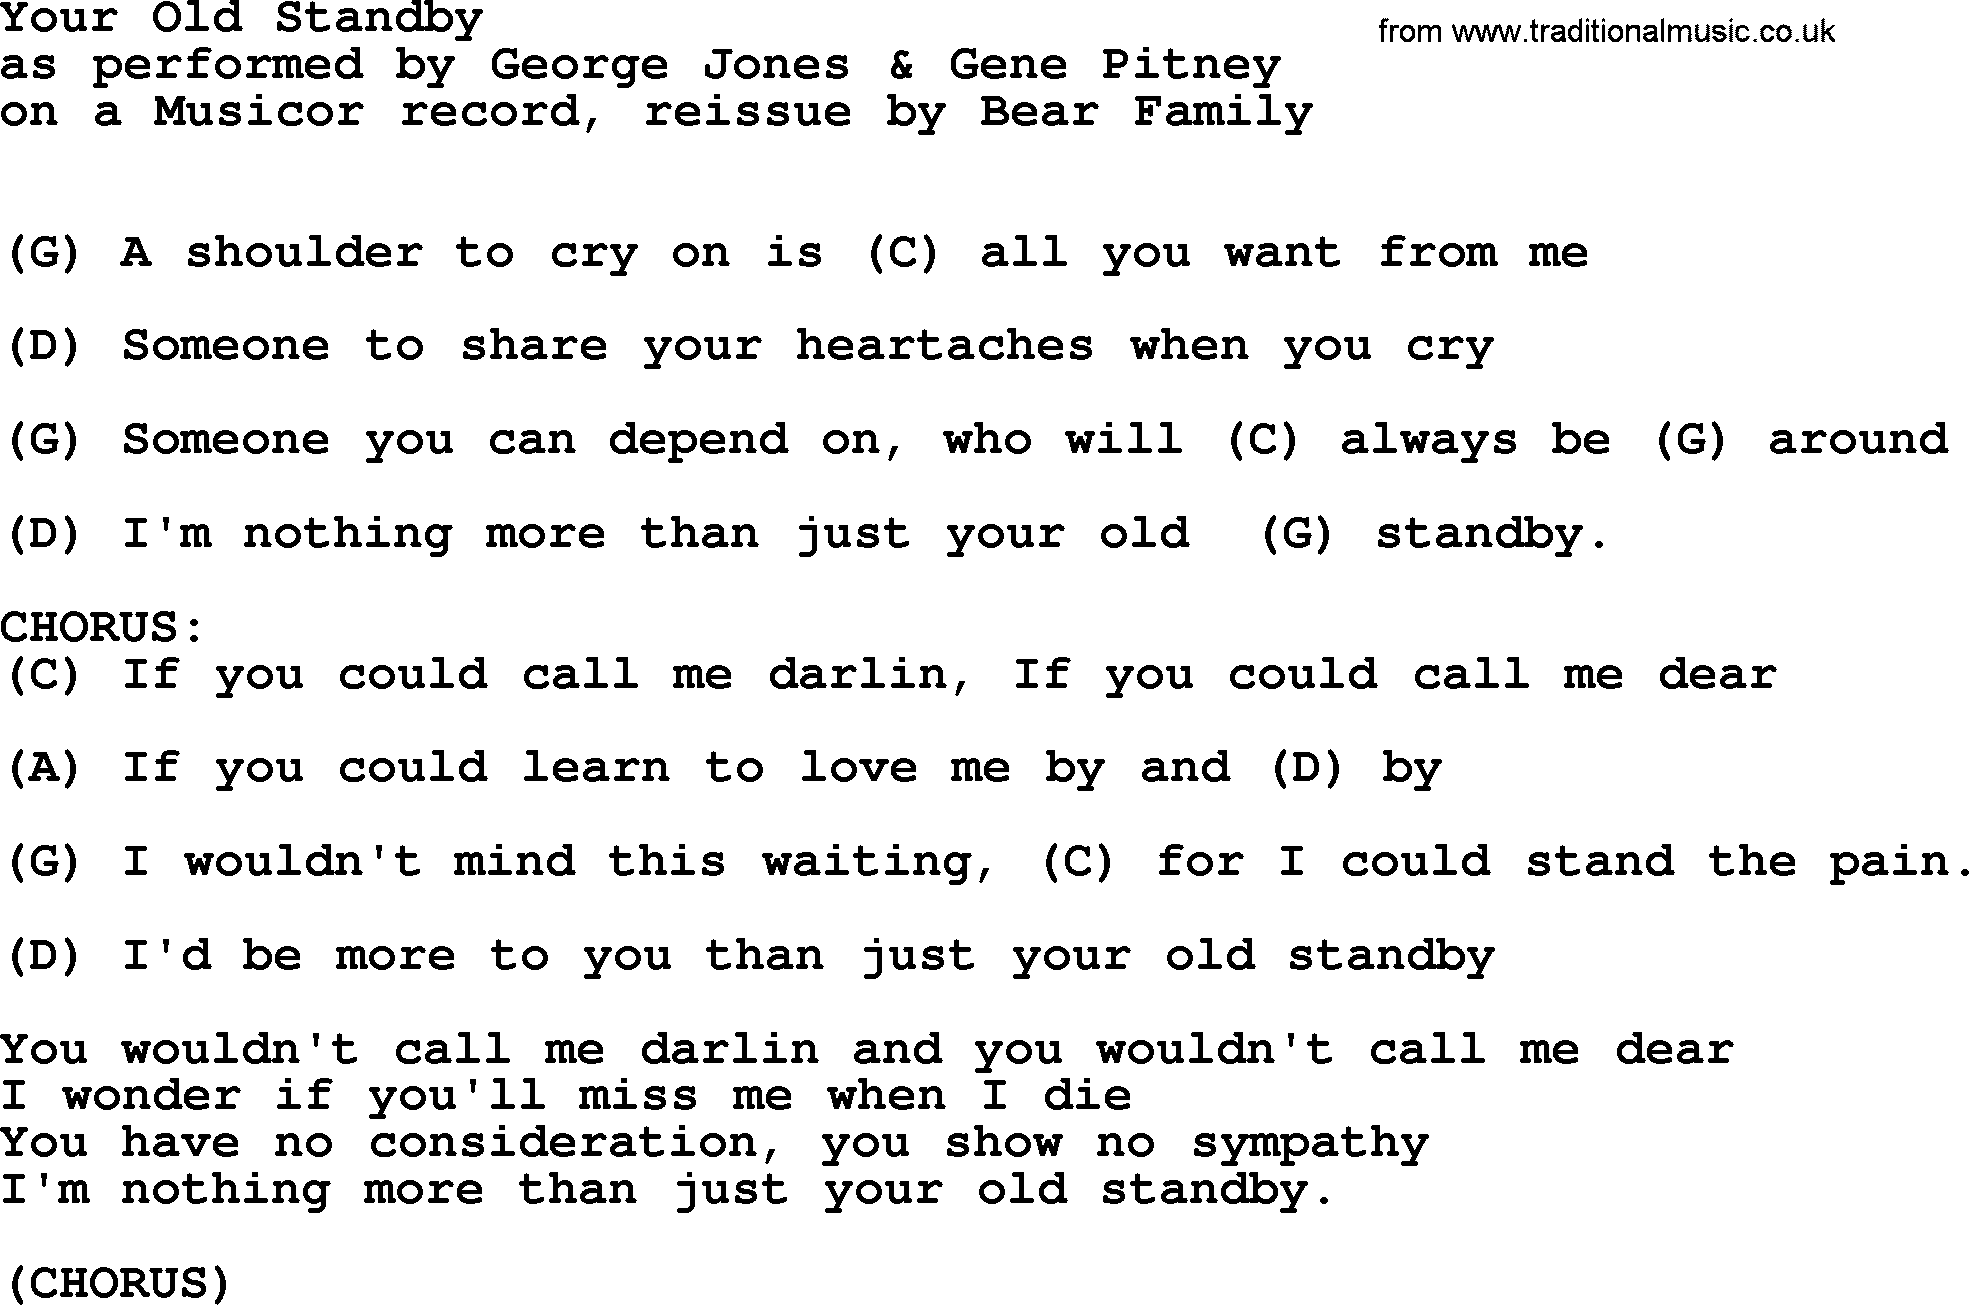 George Jones song: Your Old Standby, lyrics and chords